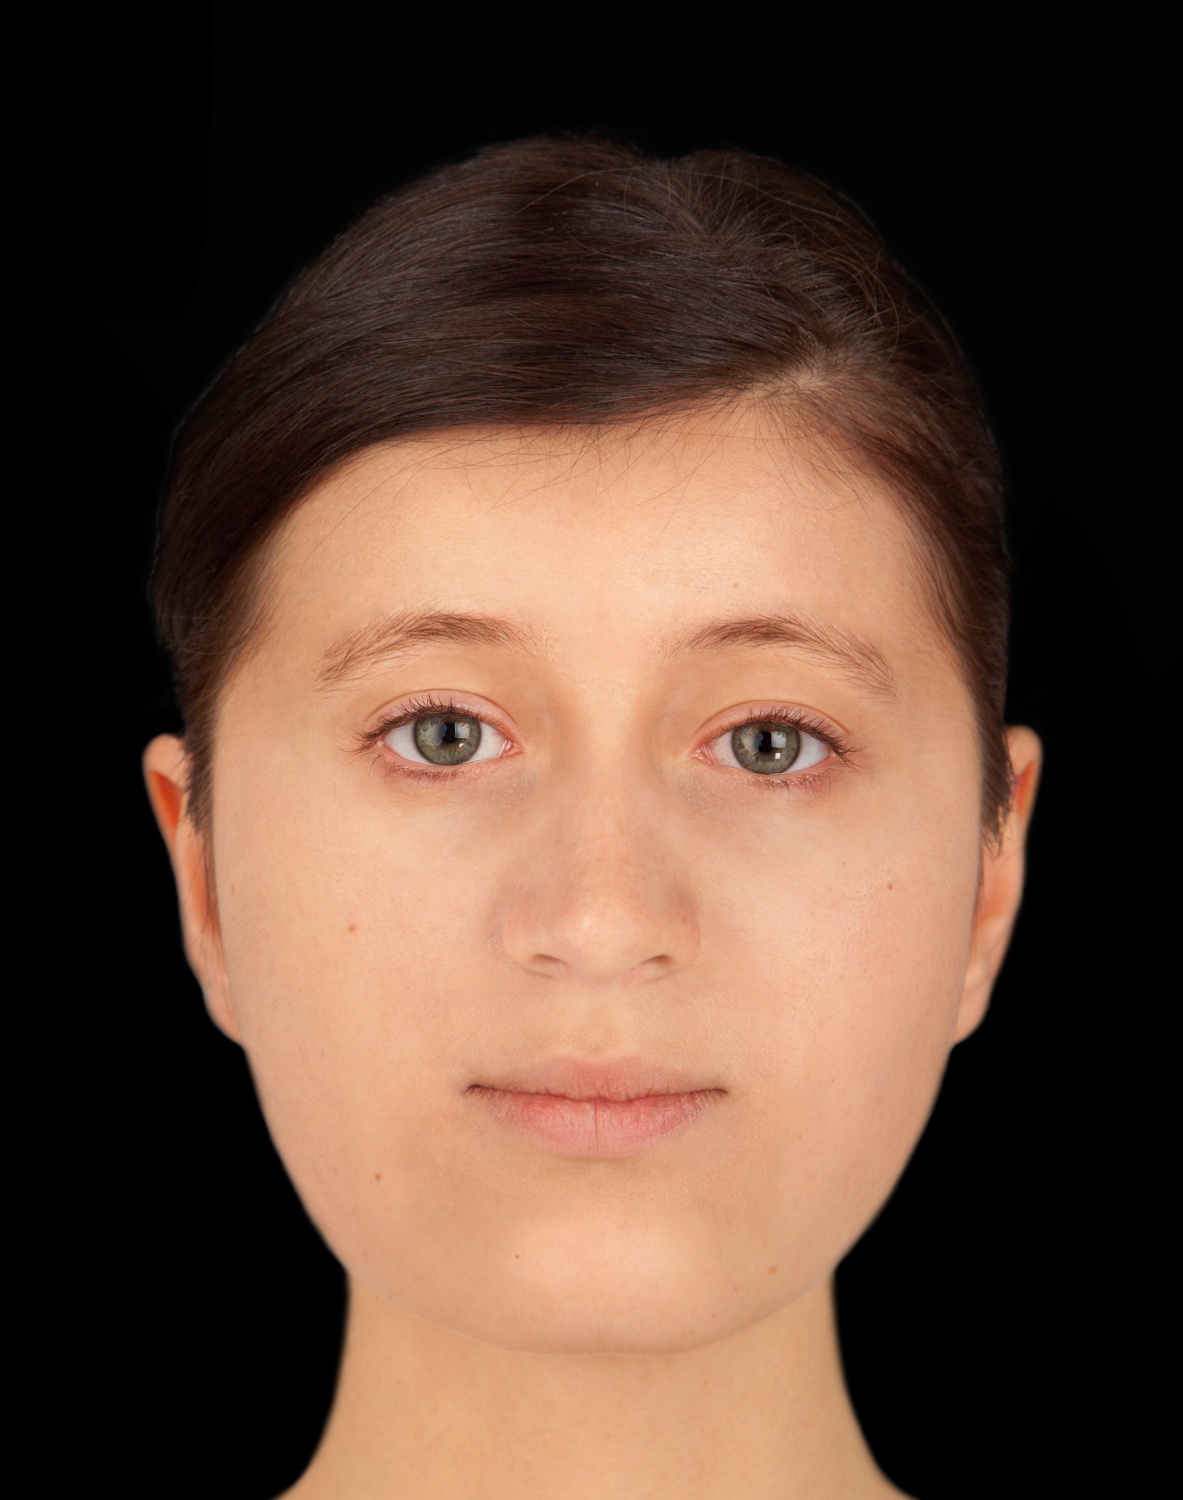 Researchers reconstruct lifestyle and face of 7th-century Anglo-Saxon teen